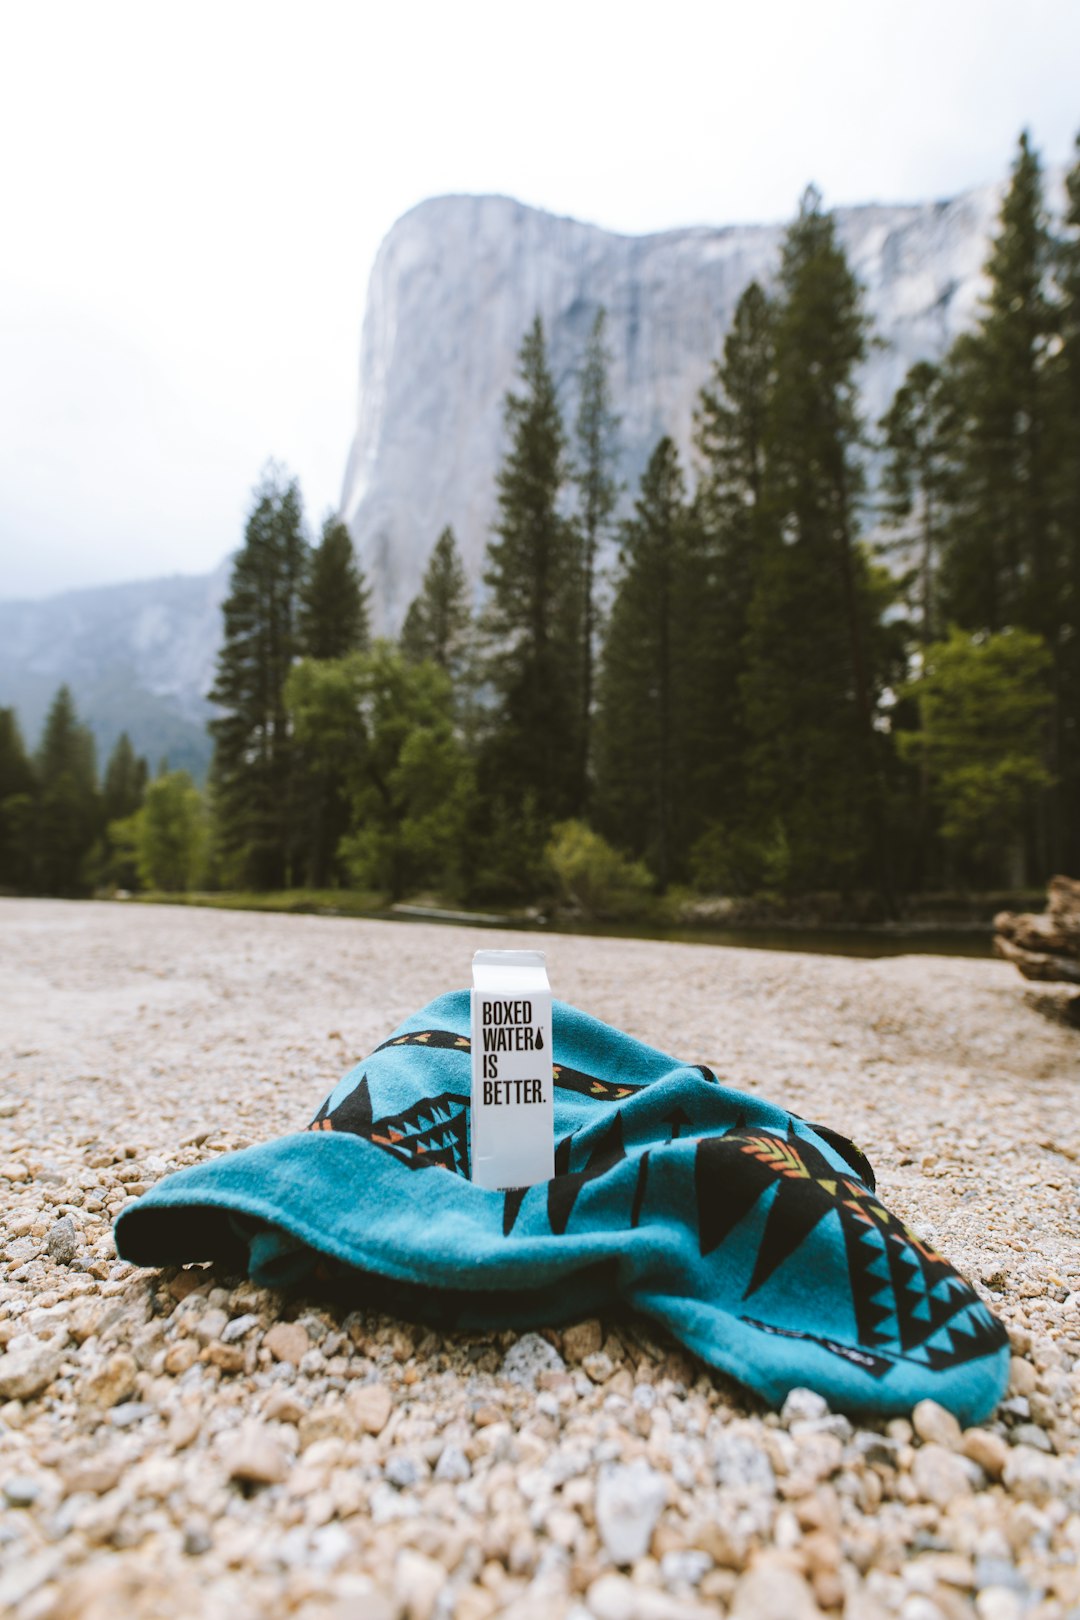 A blue garment with a Boxed Water carton in front of El Capitan in Yosemite